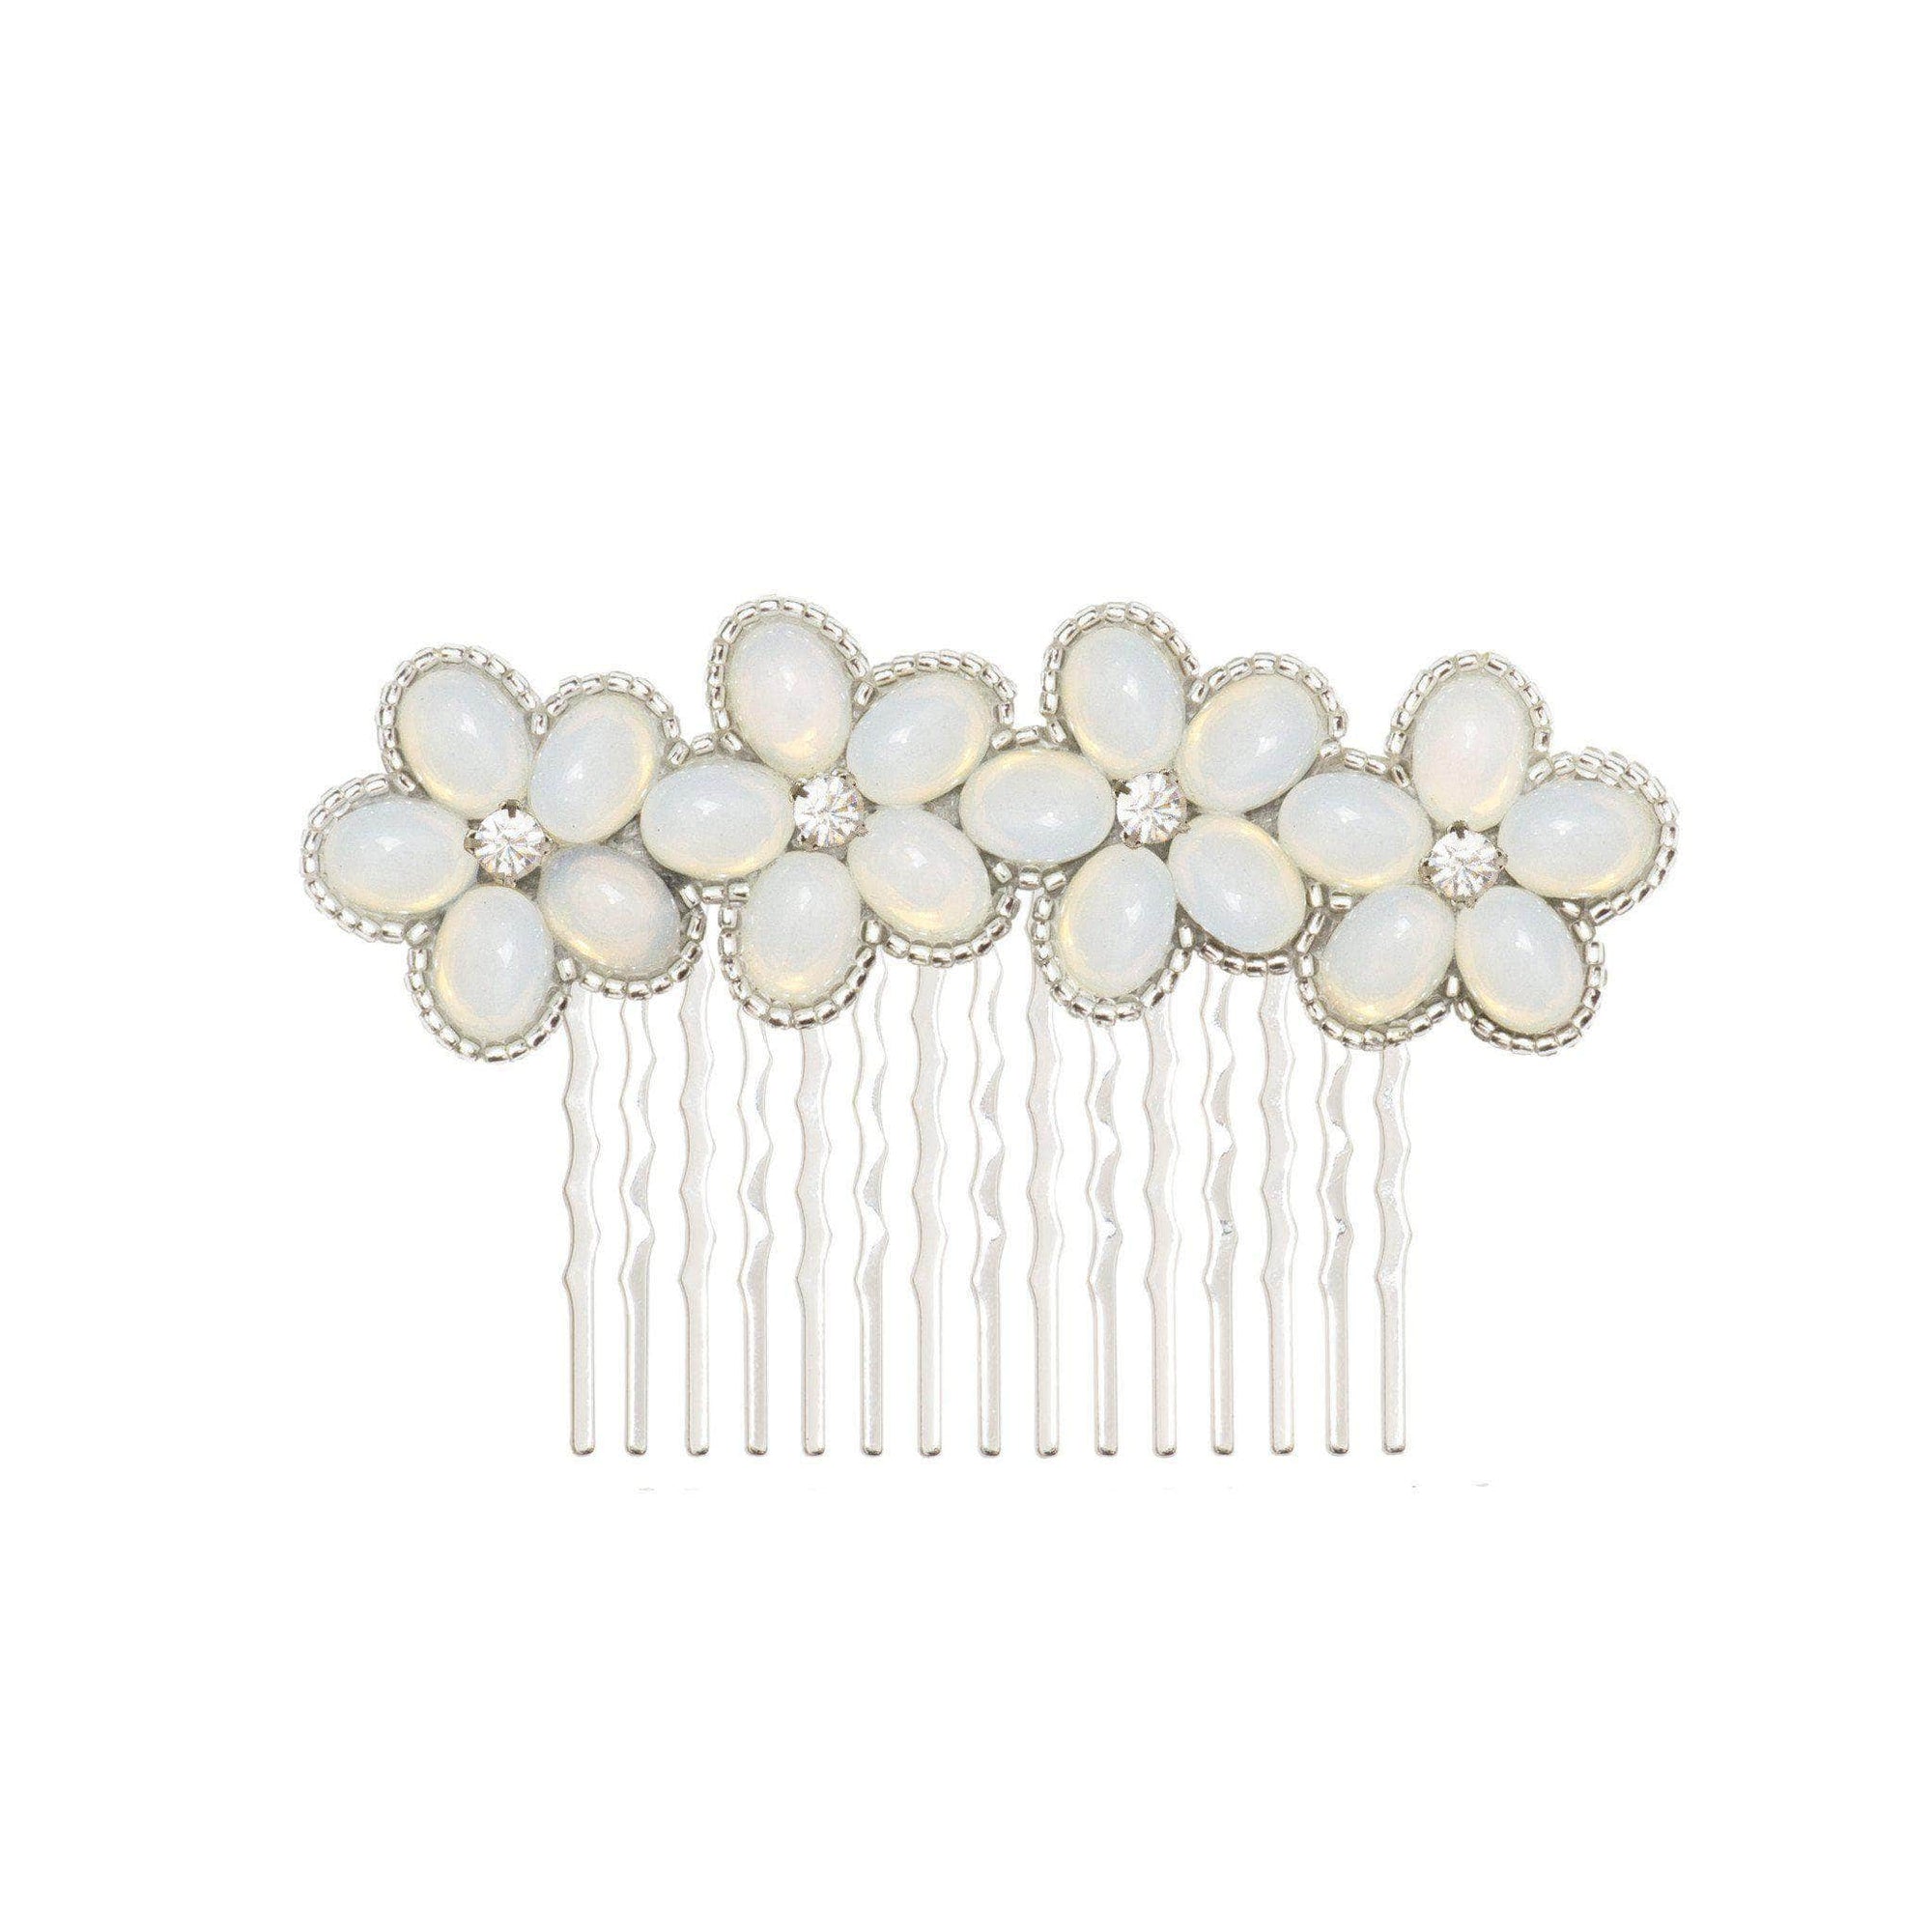 Wedding Haircomb Silver Wedding hair comb with a floral arrangement of opals and crystals - 'Prue'